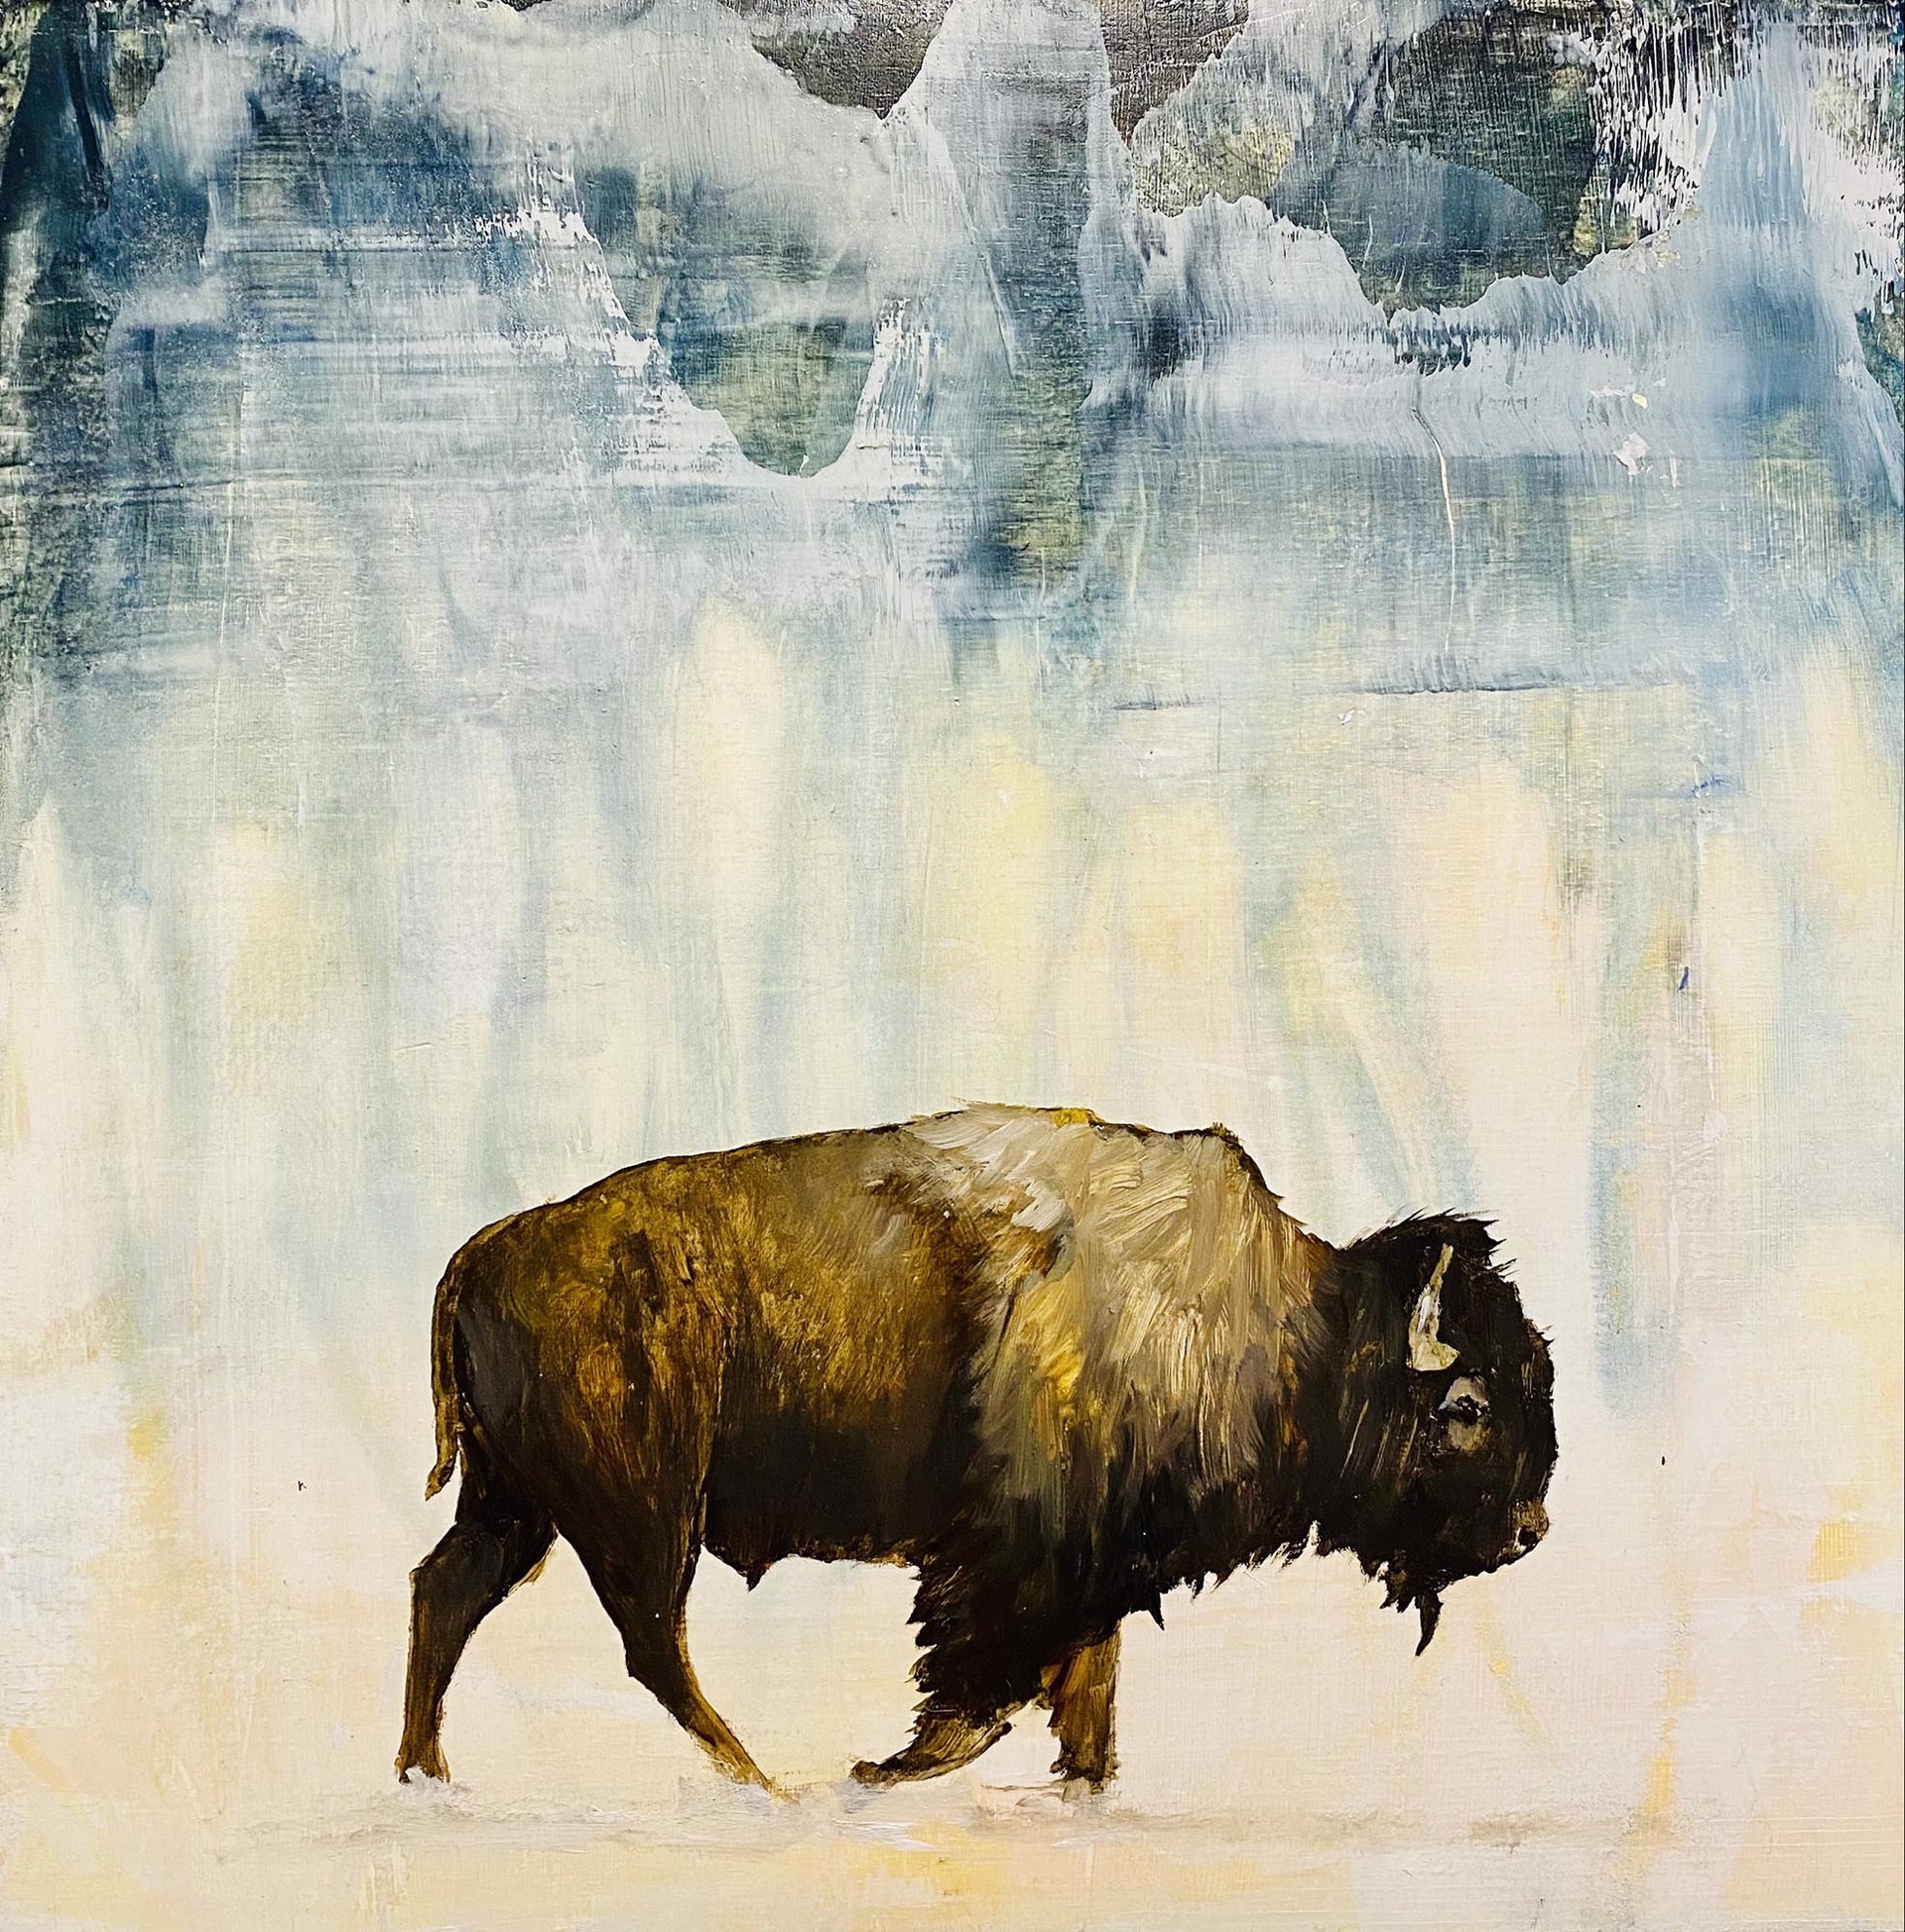 Original Oil Painting Of A Bison Walking On An Abstract Cream And Blue Background By Jenna Von Benedikt